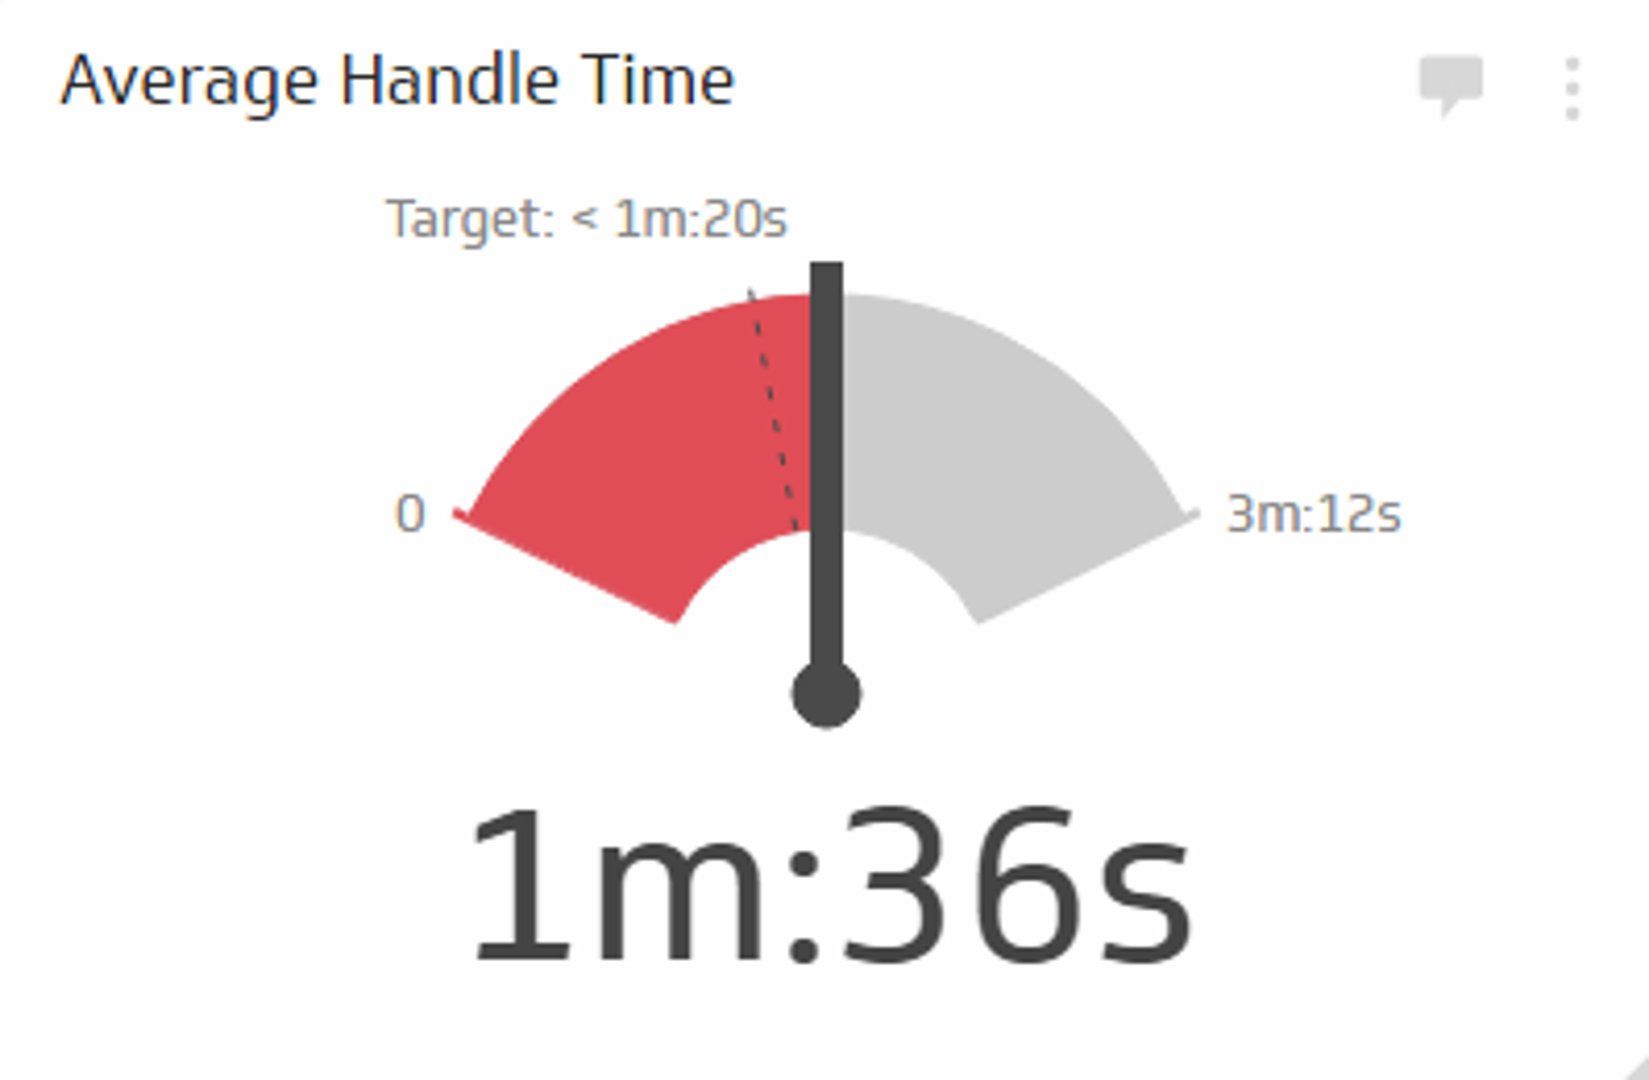 Call Center KPI Example - Average Handle Time Metric